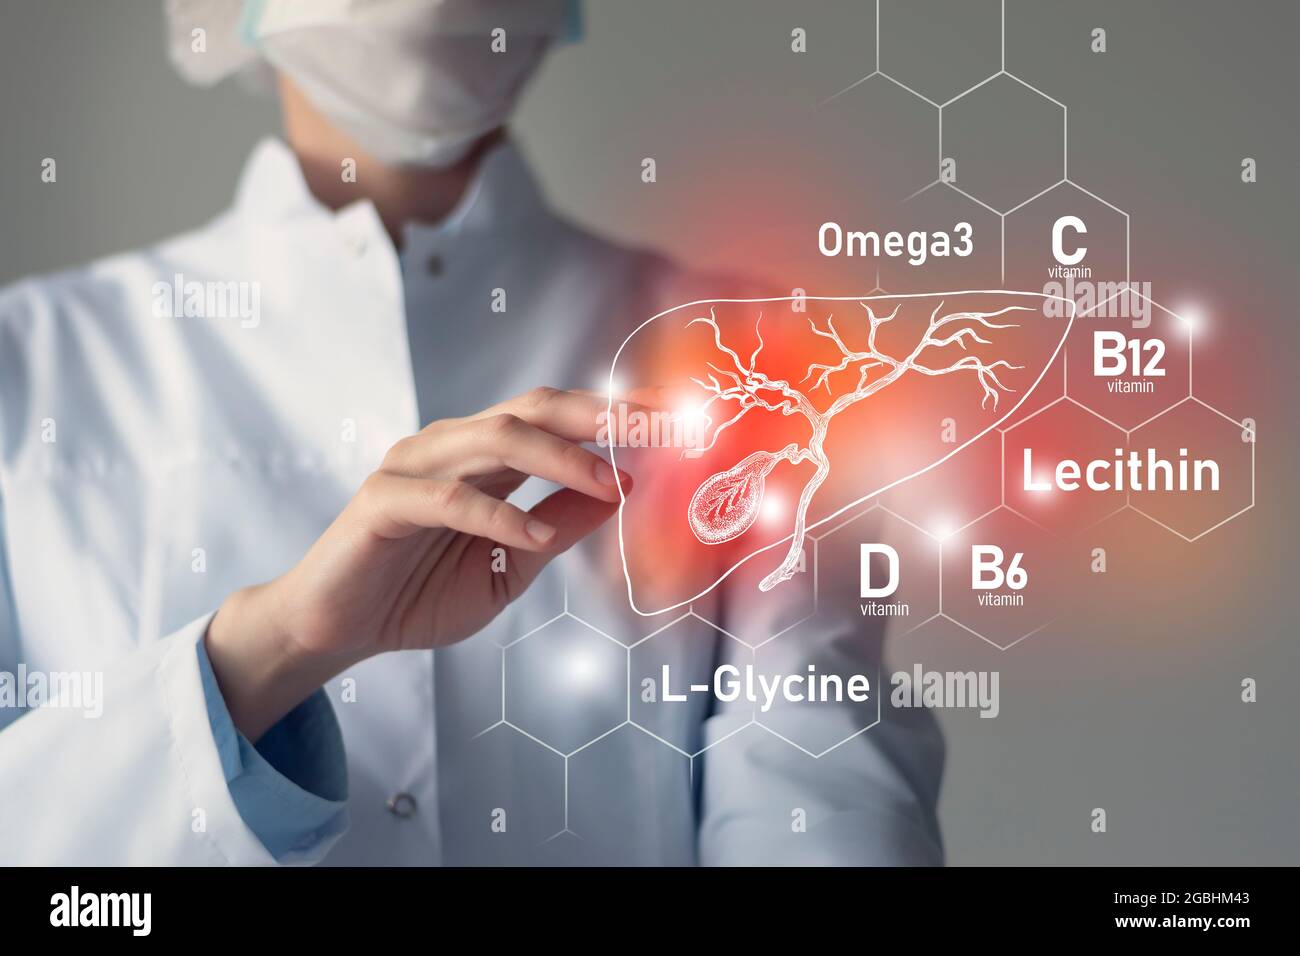 Essential nutrients for Gall Bladder health including Omega 3, L-Glycine, Omega3, Lecithin. Blurred portrait of doctor holding highlighted red Gall Bl Stock Photo